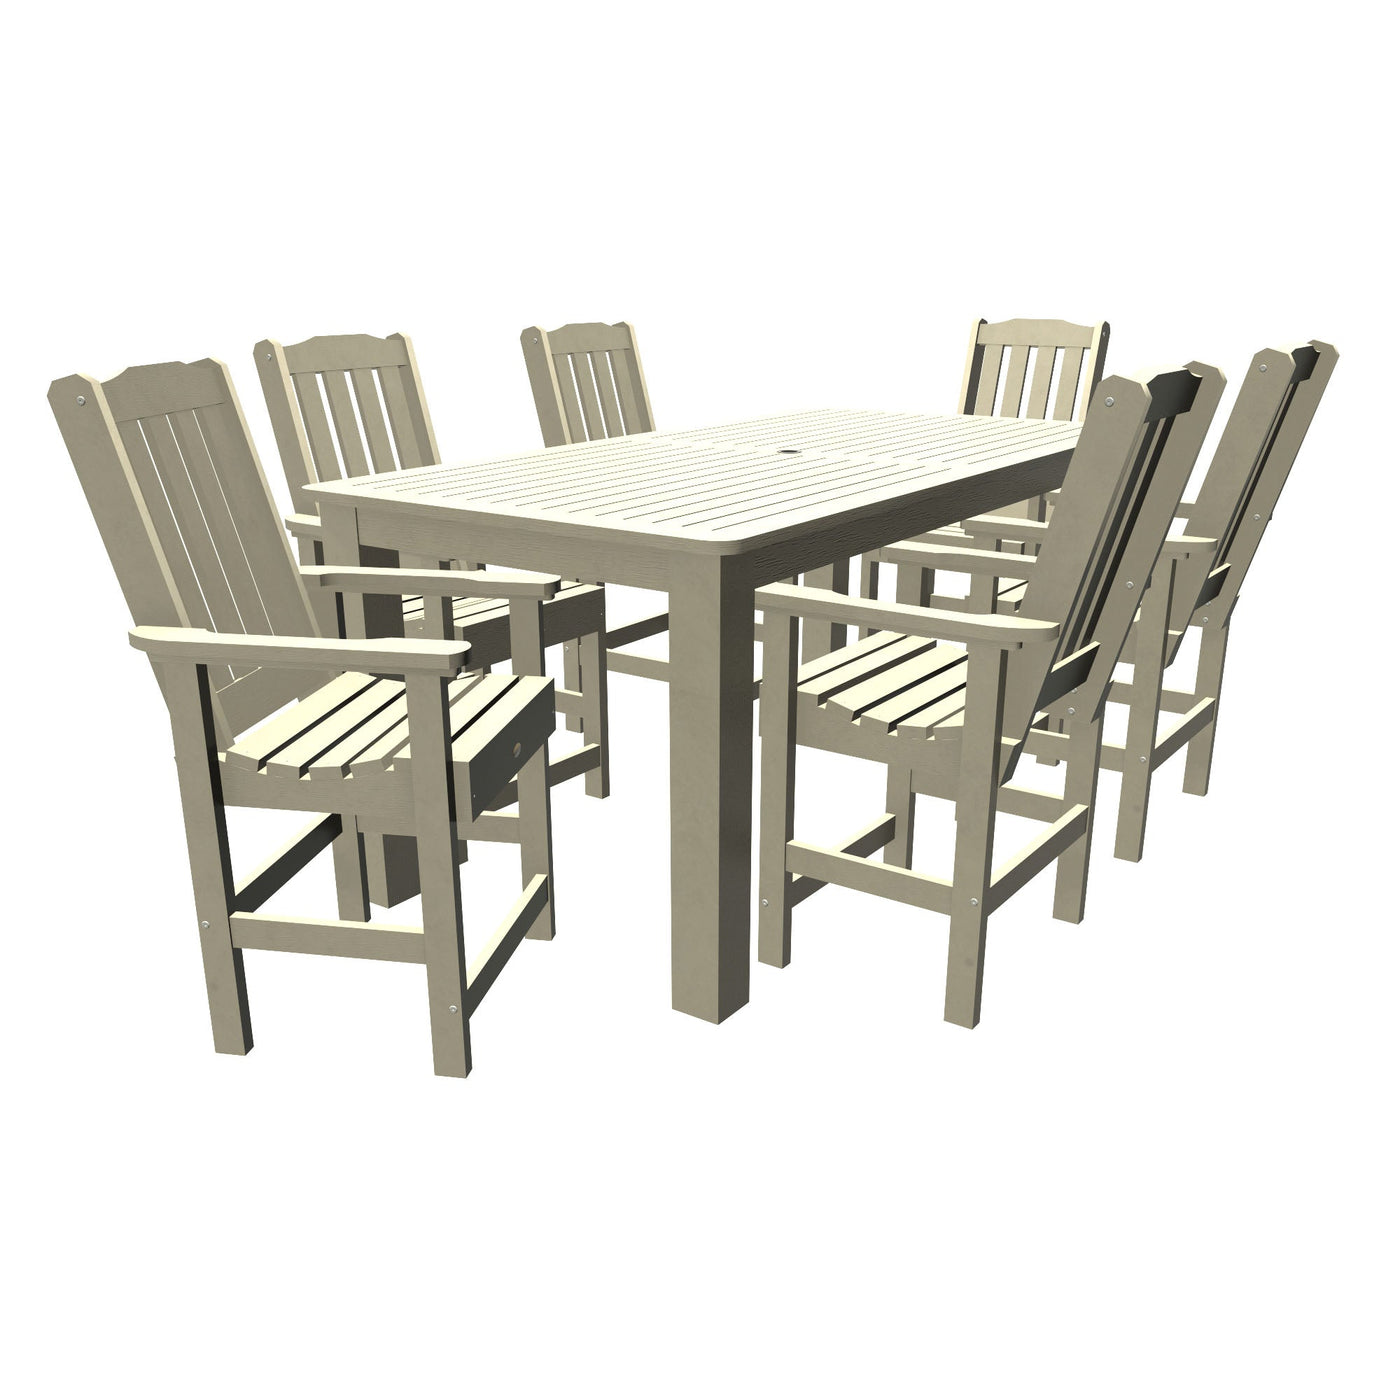 Lehigh 7pc Rectangular Outdoor Dining Set 42in x 84in - Counter Height Dining Highwood USA Whitewash 